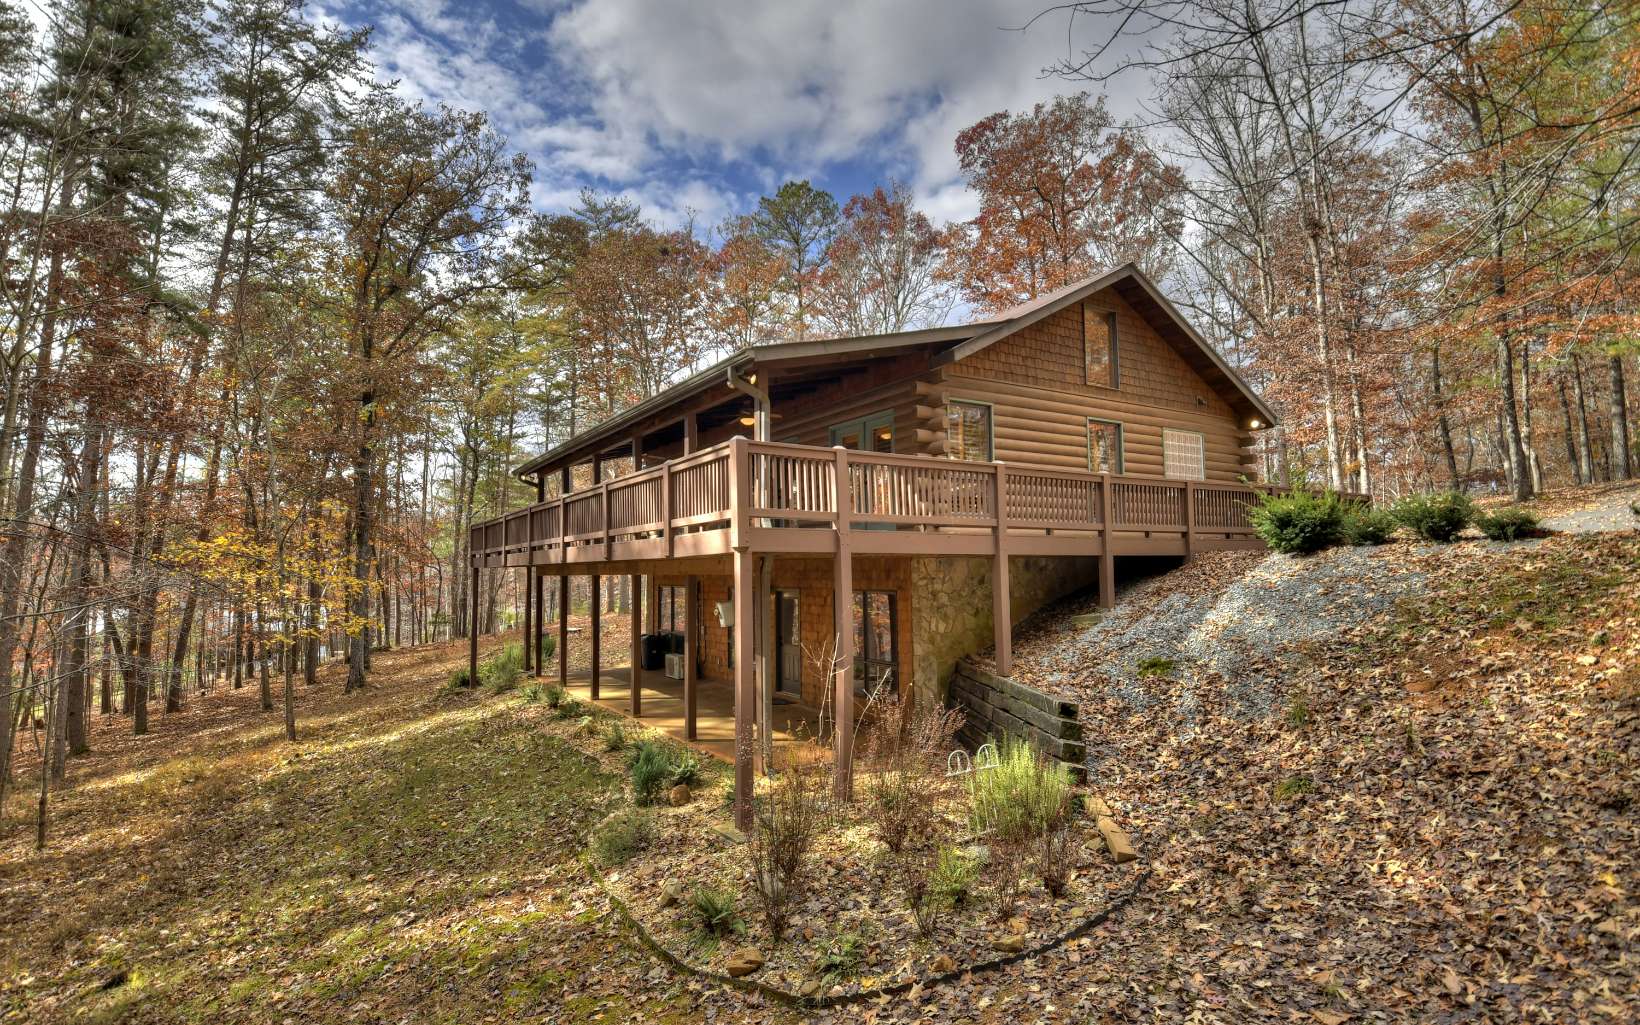 Tucked away in the beautiful Riverwalk on the Toccoa, this 3BR/3BA true log home is the answer to your mountain living dreams. Once behind the gates of Riverwalk, you'll continue the all paved drive to this hidden gem. You'll notice an asphalt circle drive, wrap around porch, porte-cochere, metal roof, and wooded back yard for privacy and low maintenance upon arrival. Once moving inside you'll soak in the warm and inviting feel with two suites on the main floor (complete with access to the back deck), along with the large wood burning stone fp & spacious kitchen, living room & dining area. This open concept living is highlights the plentiful light, custom cabinetry and other beautiful features you'll enjoy. On the terrace level, you will find the 3rd BR & BA, family/game room & large covered concrete patio. Other highlights include amazing community area with river access, boat ramp, tiki bar/kitchen, large pavilion that boasts a stunning rock fireplace, hiking trails along the rushing waters of the Toccoa & more. With no short term rentals allowed, you will enjoy your full time retreat or own mountain escape with additional privacy and security!